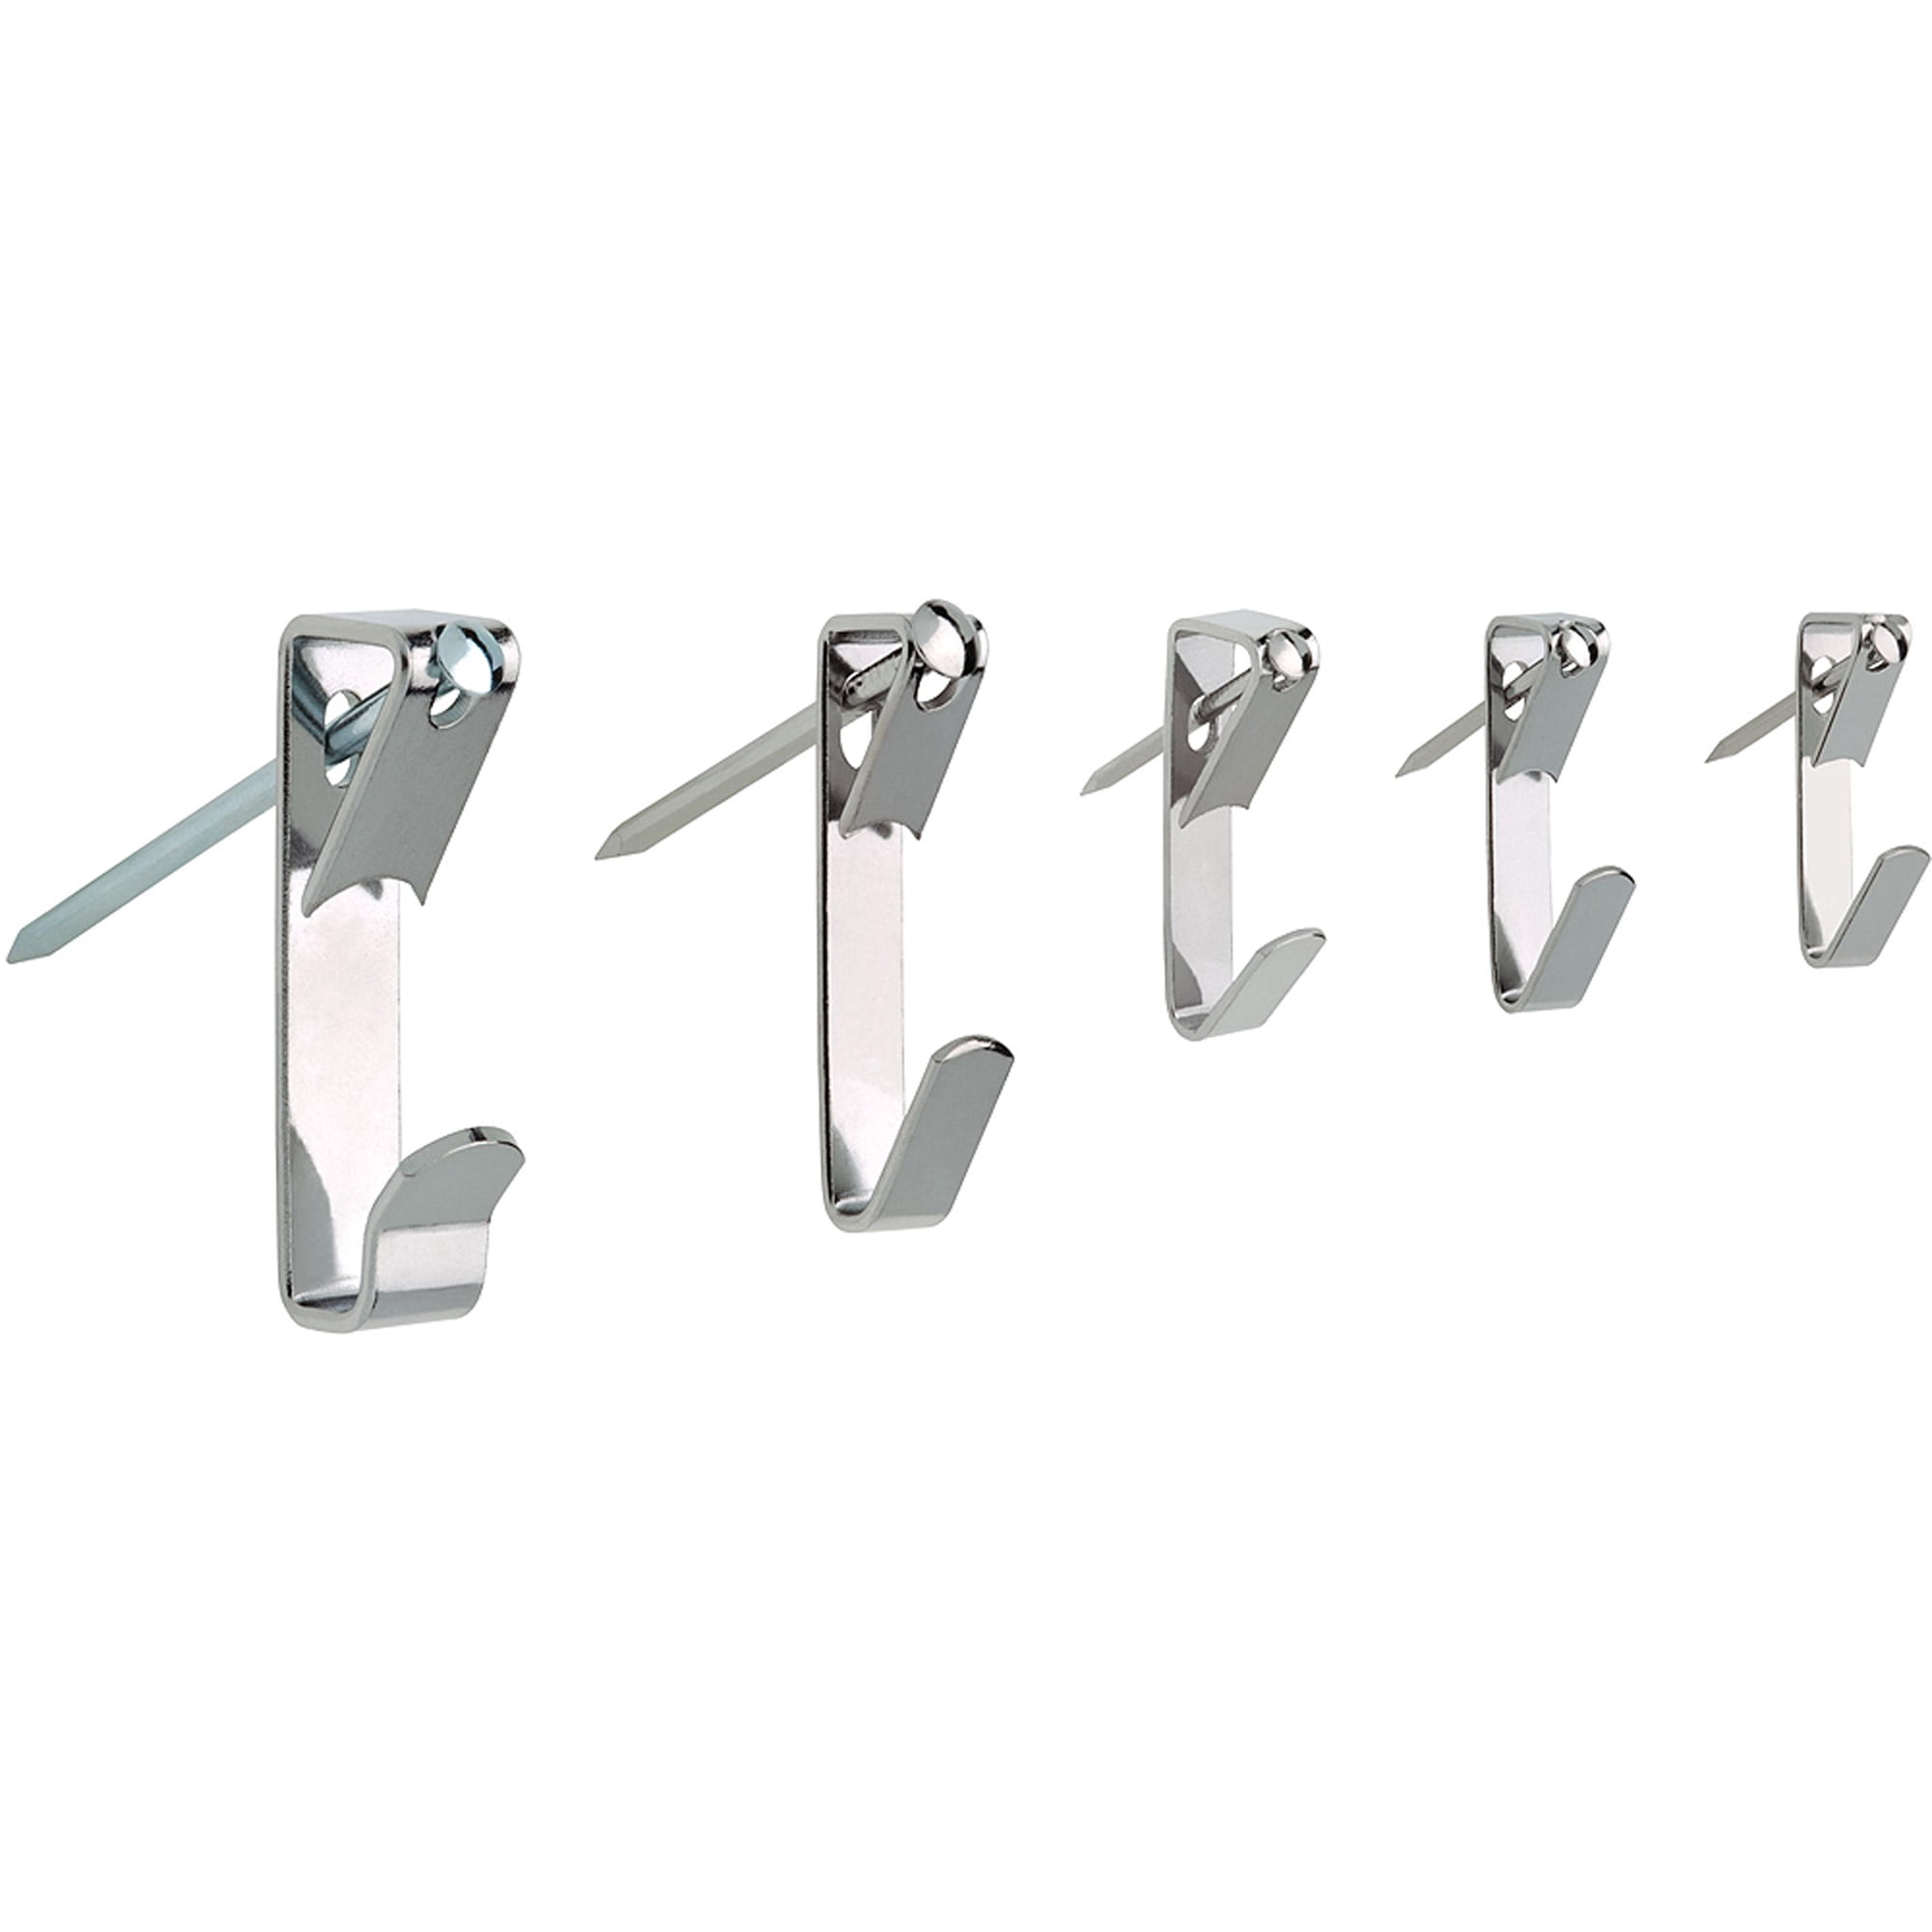 New Arrow Utility Hook with Anchors 4/pk 172230-Free Shipping! 